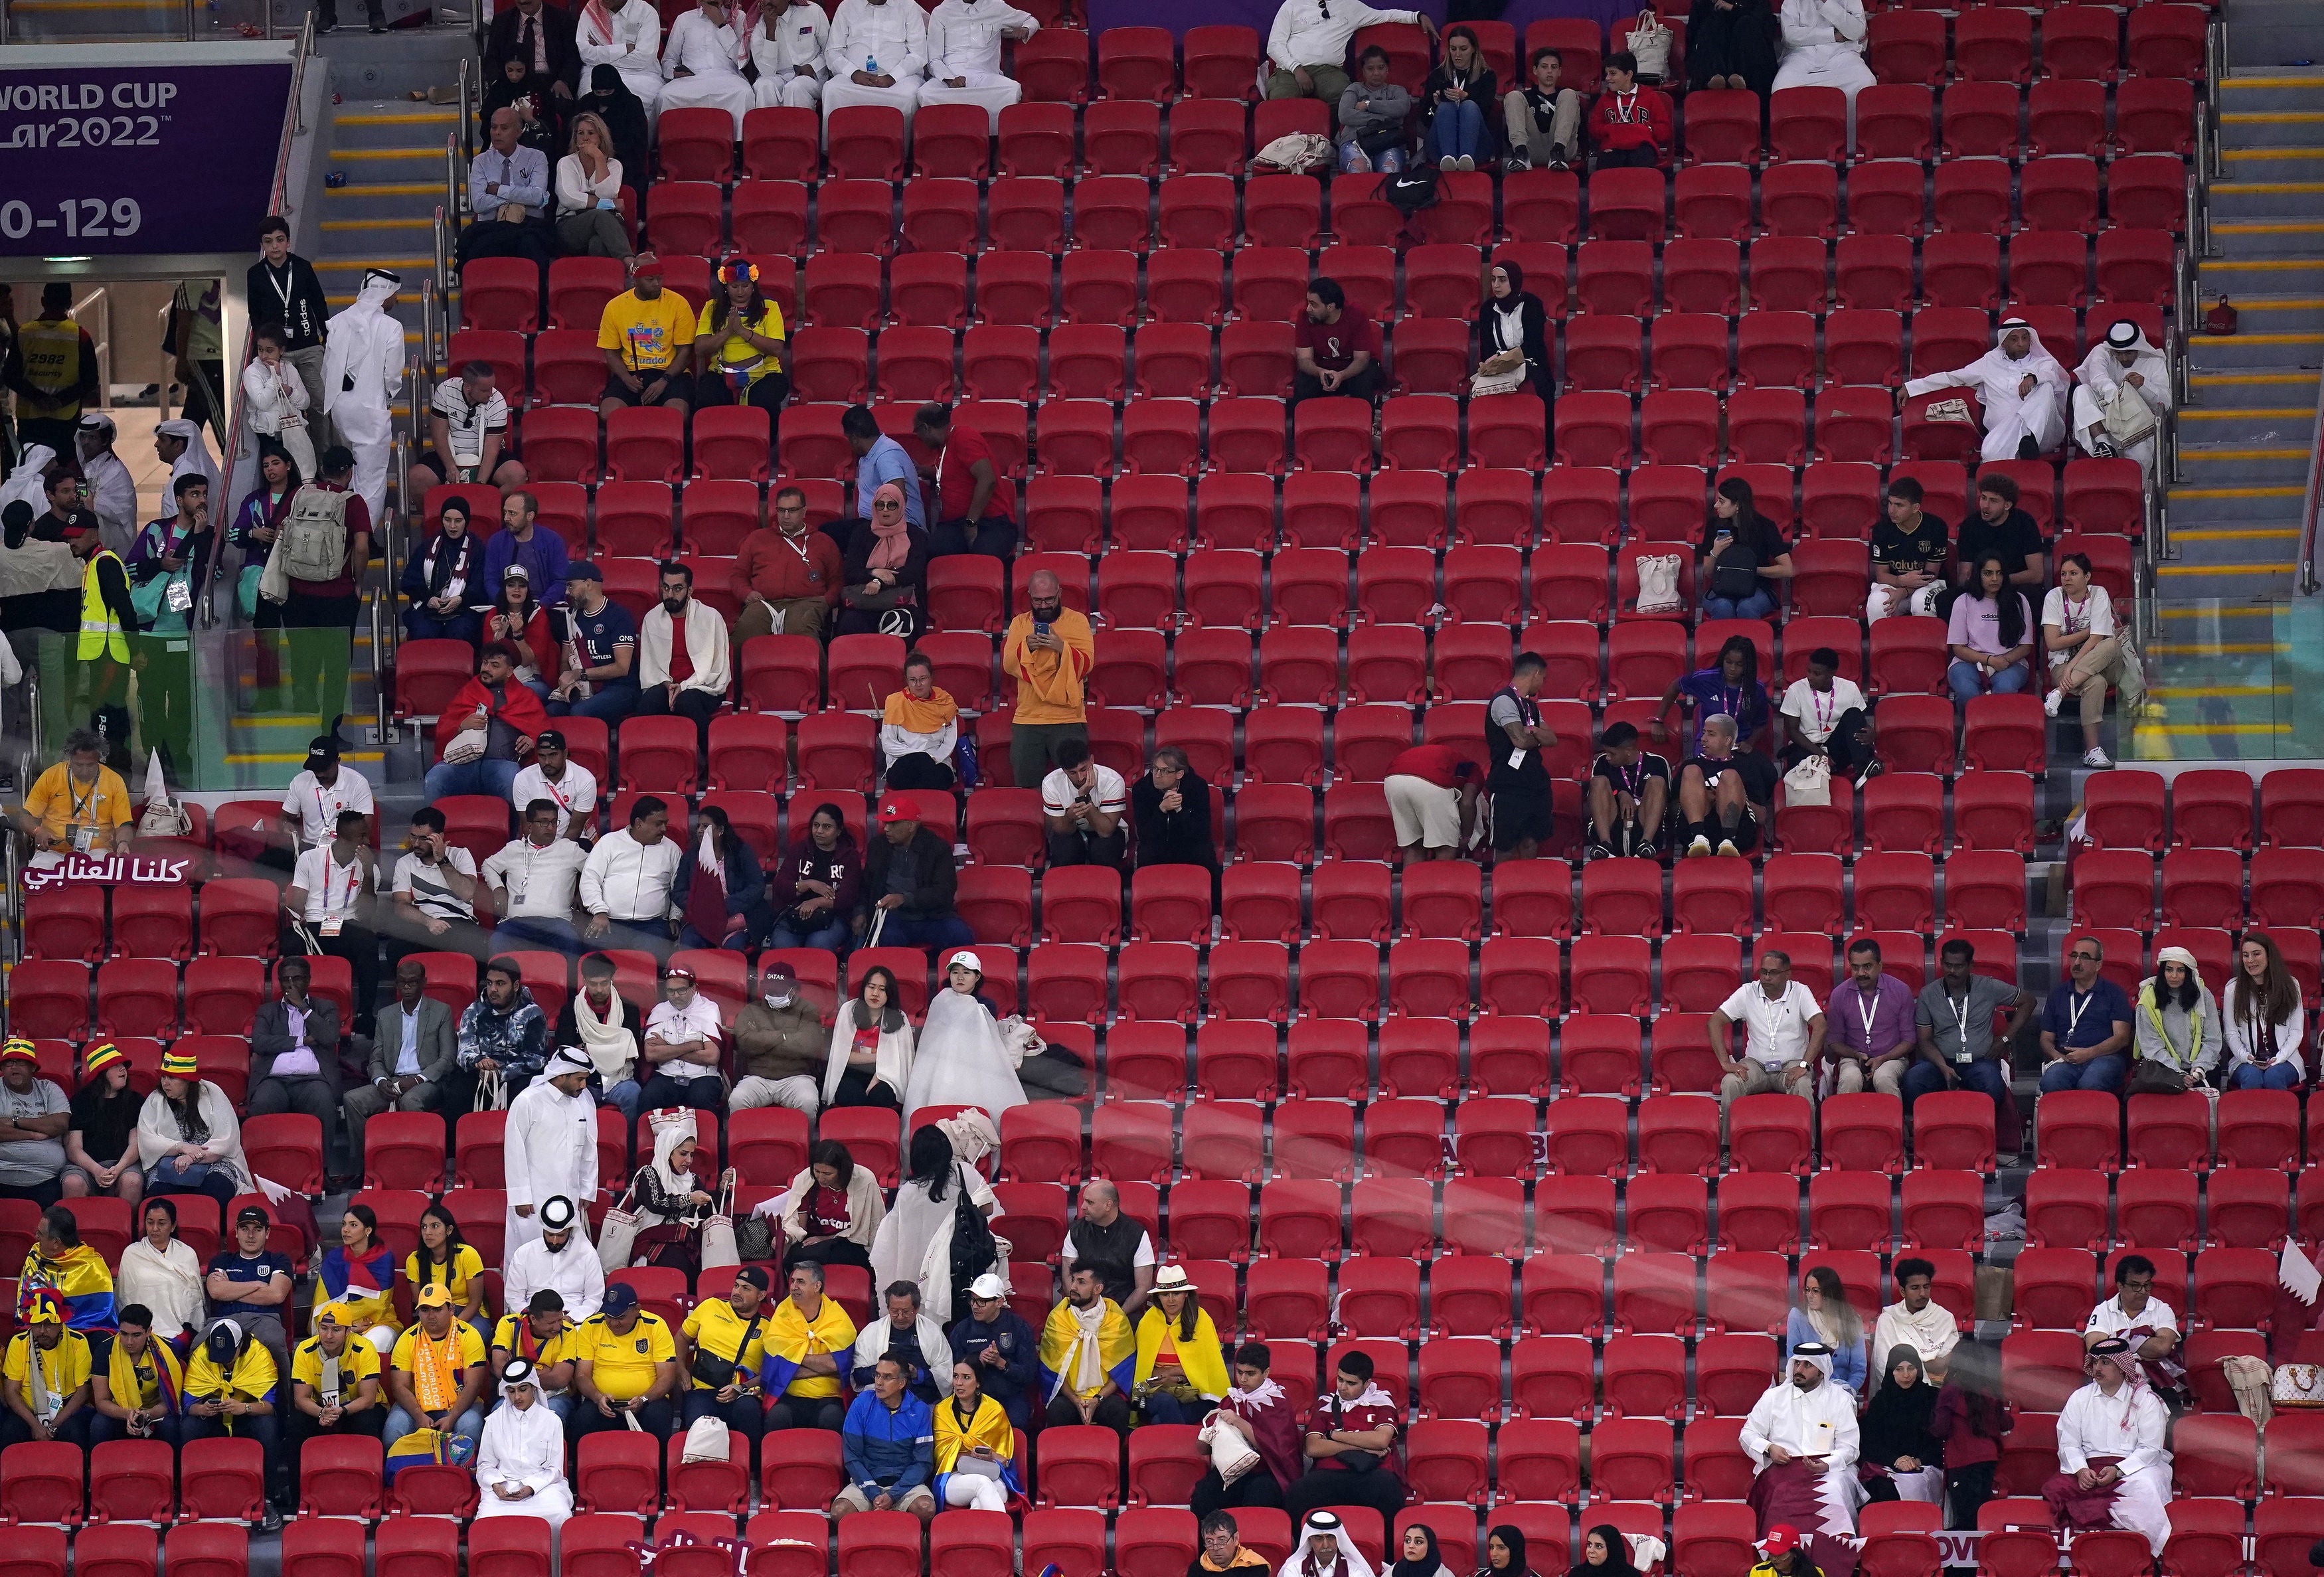 There have been empty seats at most World Cup matches so far